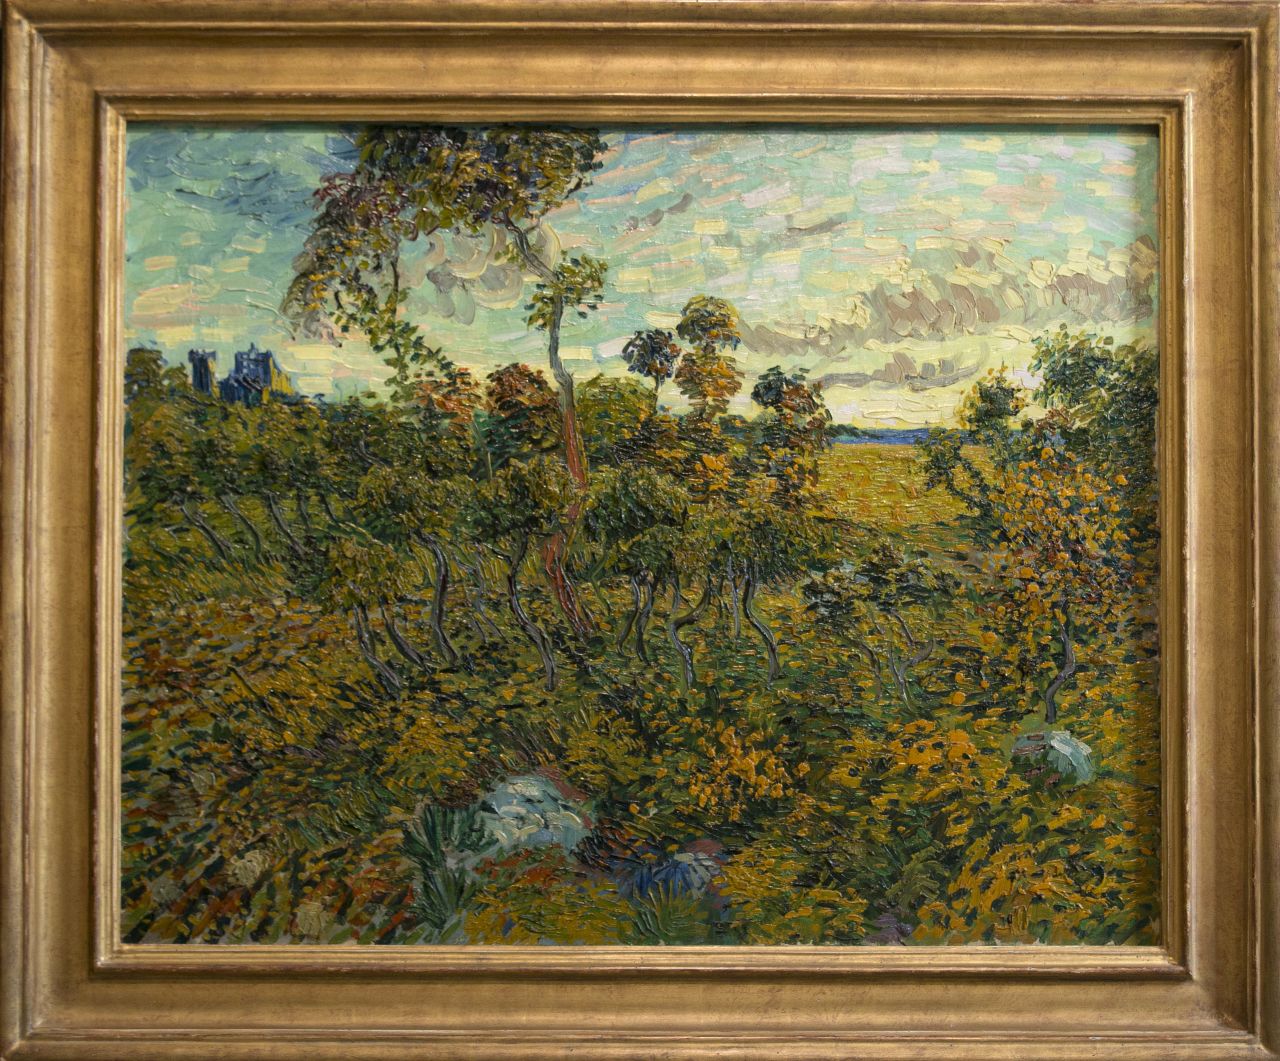 The "Sunset at Montmajour" was painted in 1888. The museum has identified the painting after "extensive research into style, technique, paint, canvas, the depiction, van Gogh's letters and the provenance."